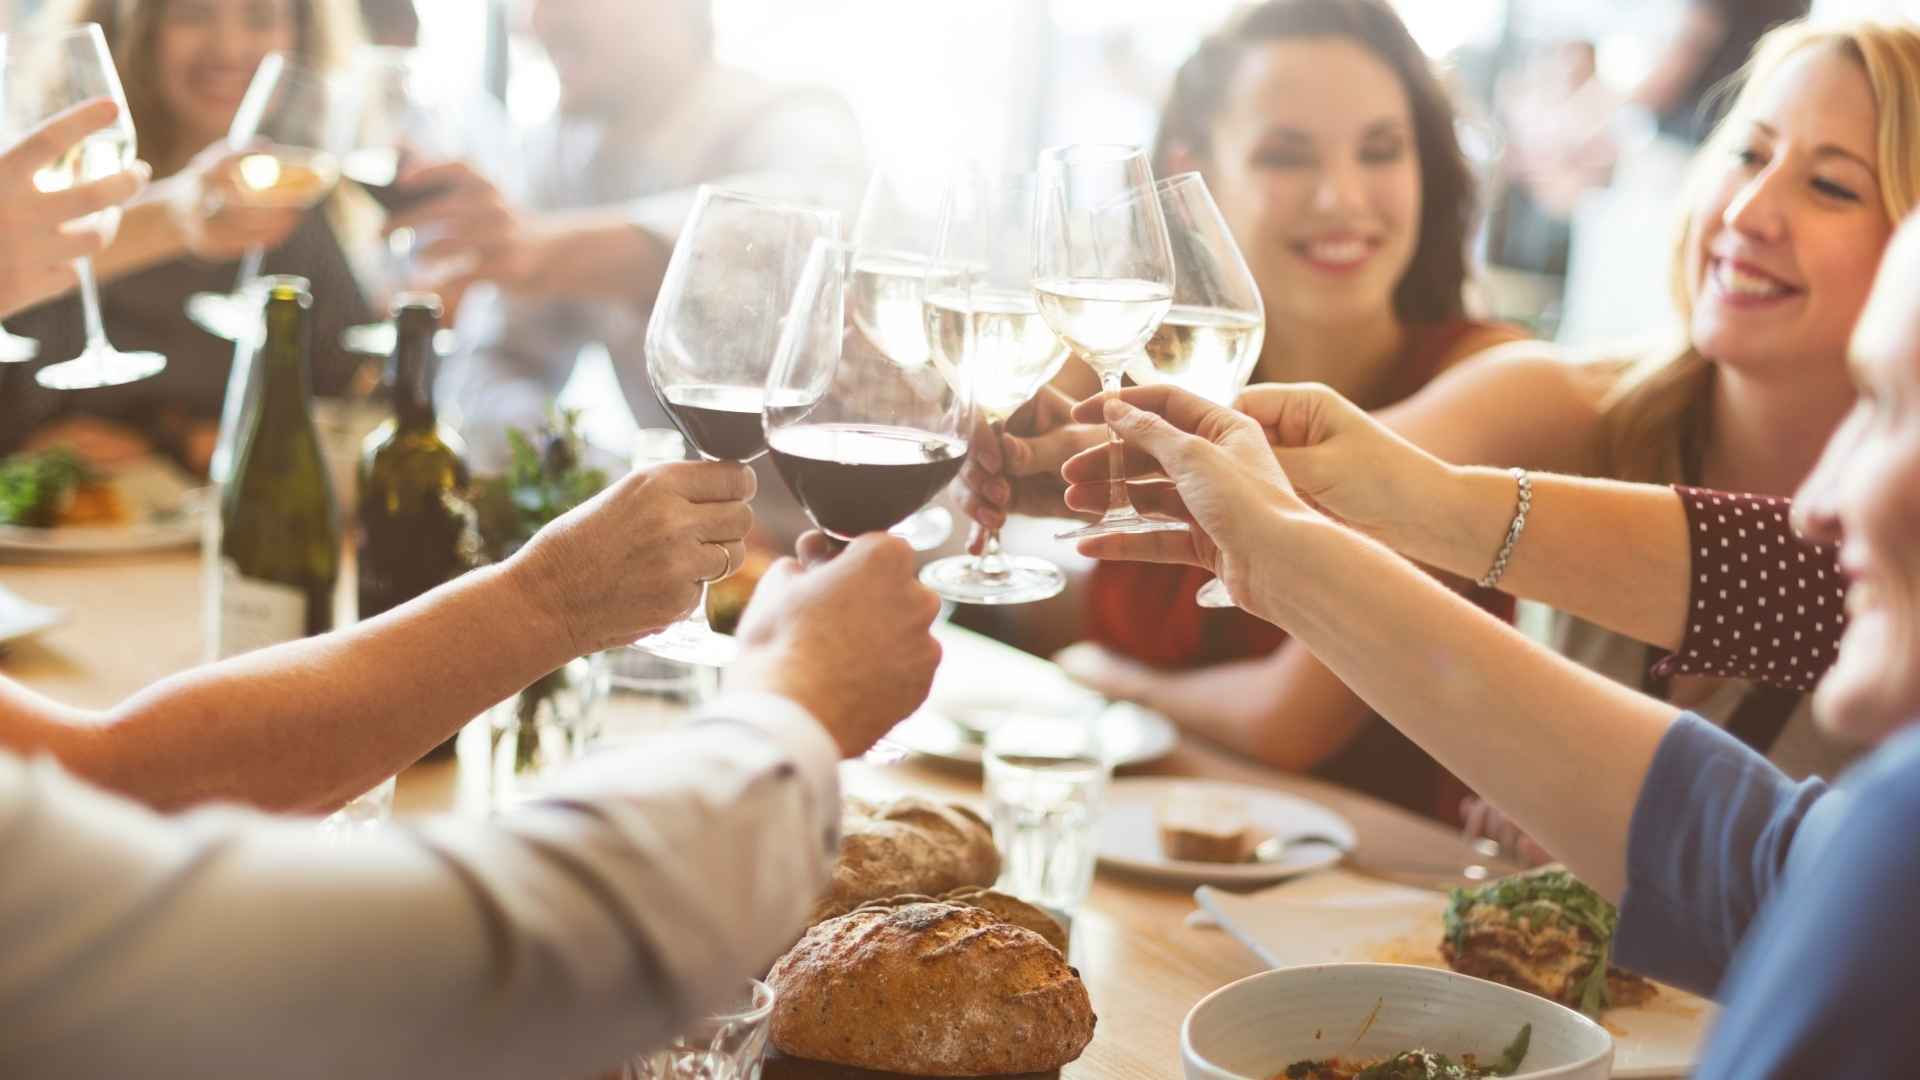 Let’s raise a glass together on National Wine Day